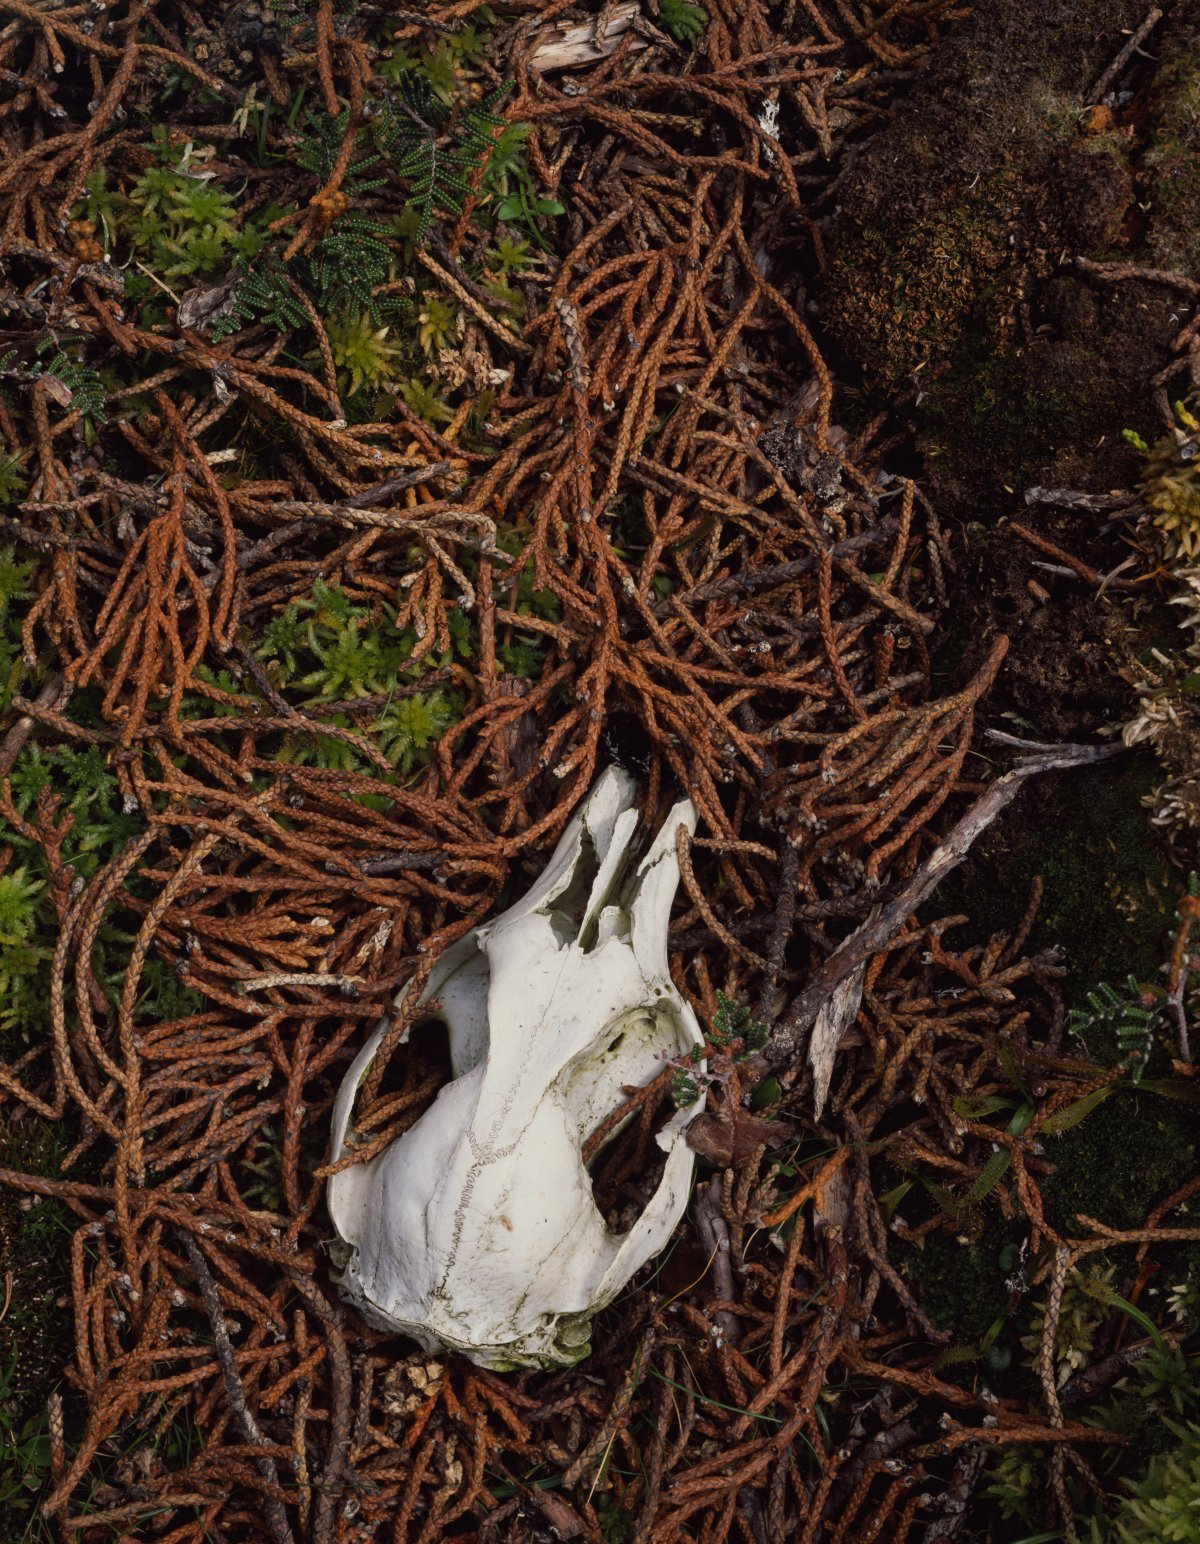 The skull of a small wallaby sits among brown dead pencil pine leaves